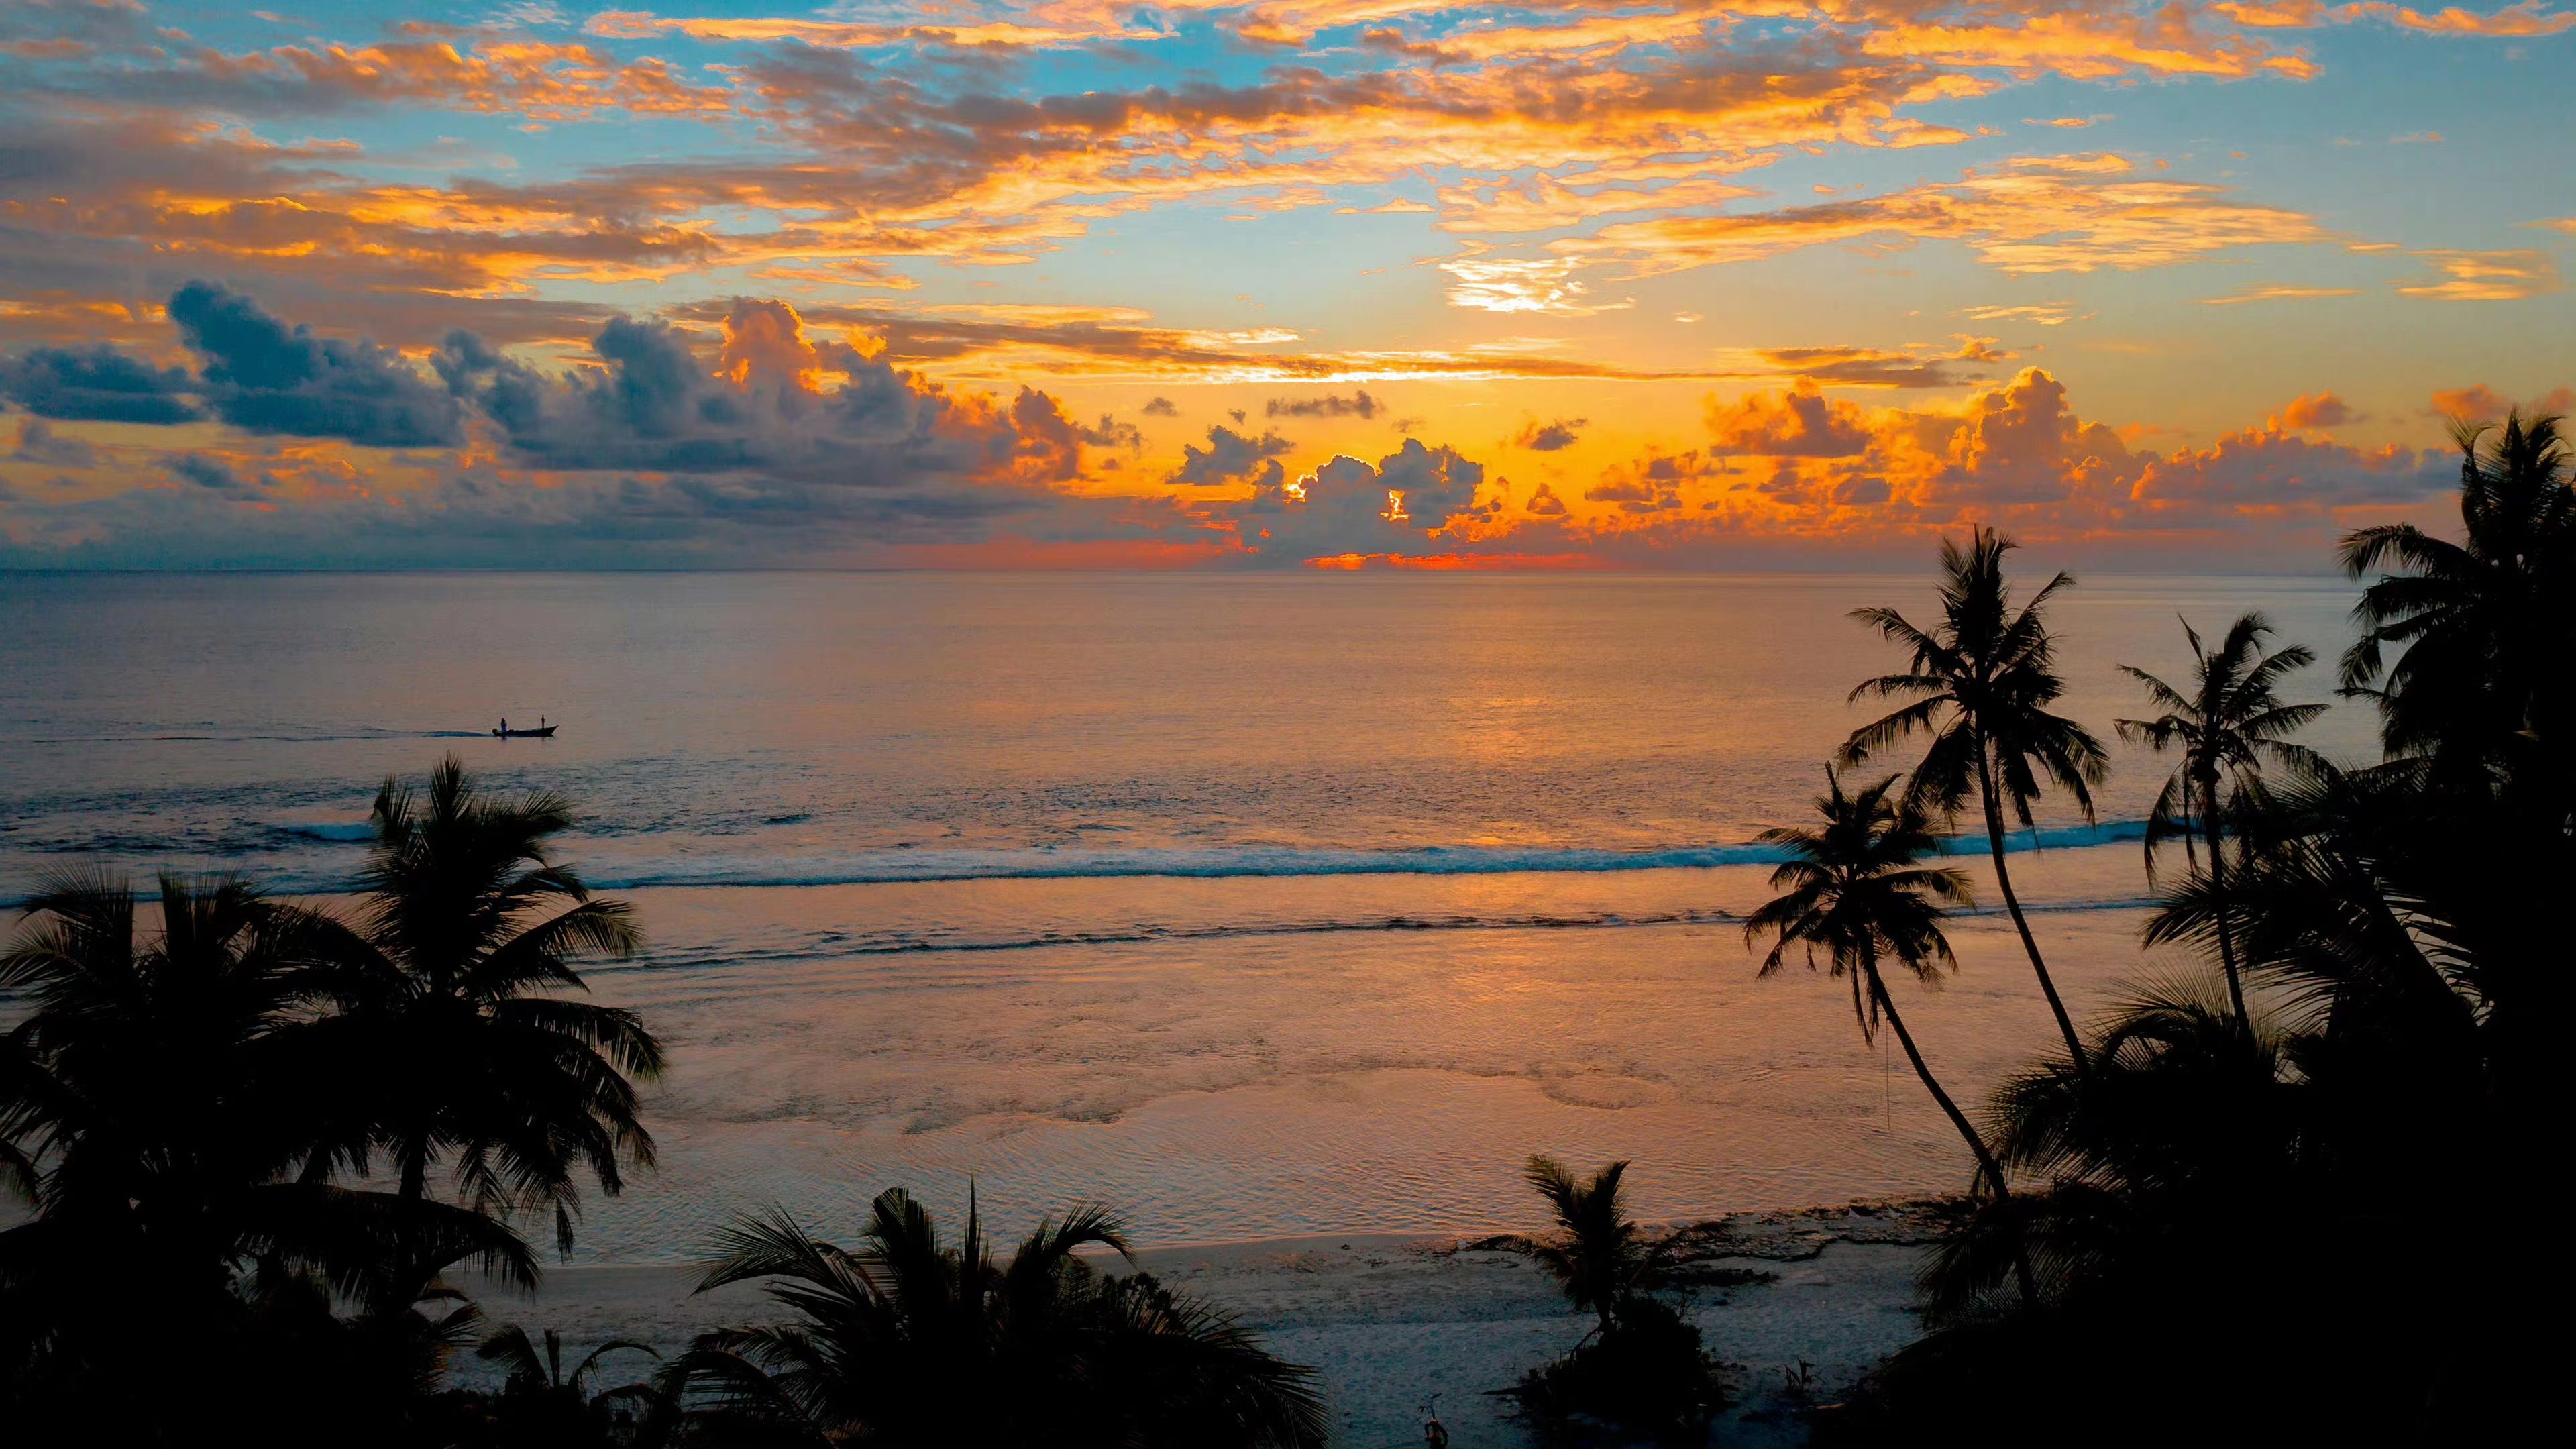 General 3840x2160 landscape sunset clouds palm trees Carribean sunset glow sky waves water